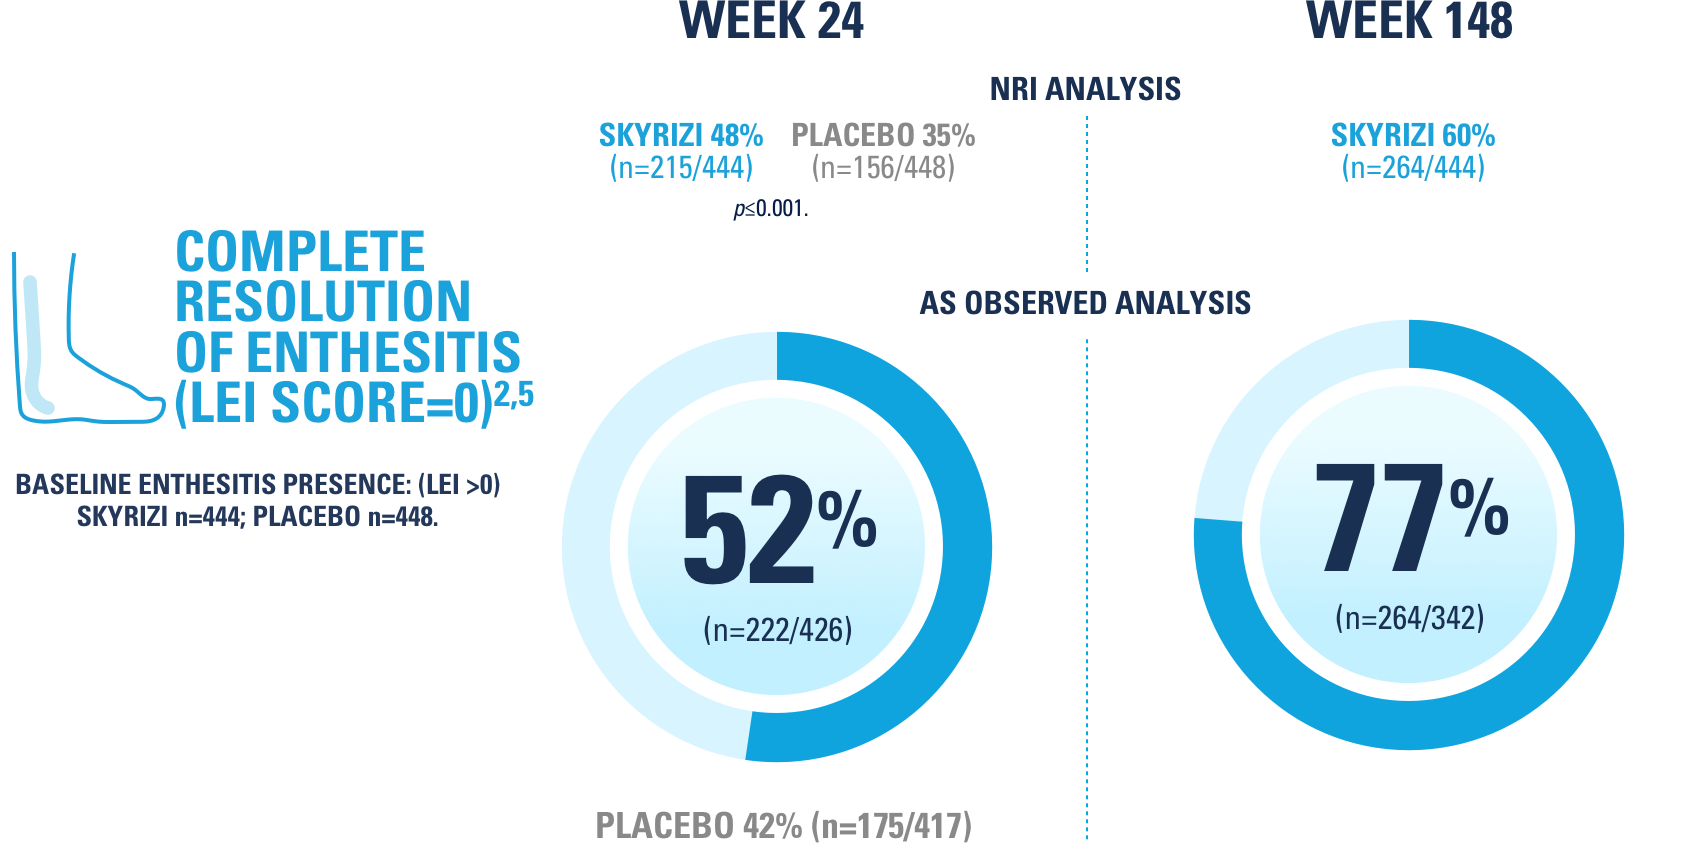 48% of SKYRIZI patients saw complete resolution of enthesitis at week 24 and 60% by week 148.